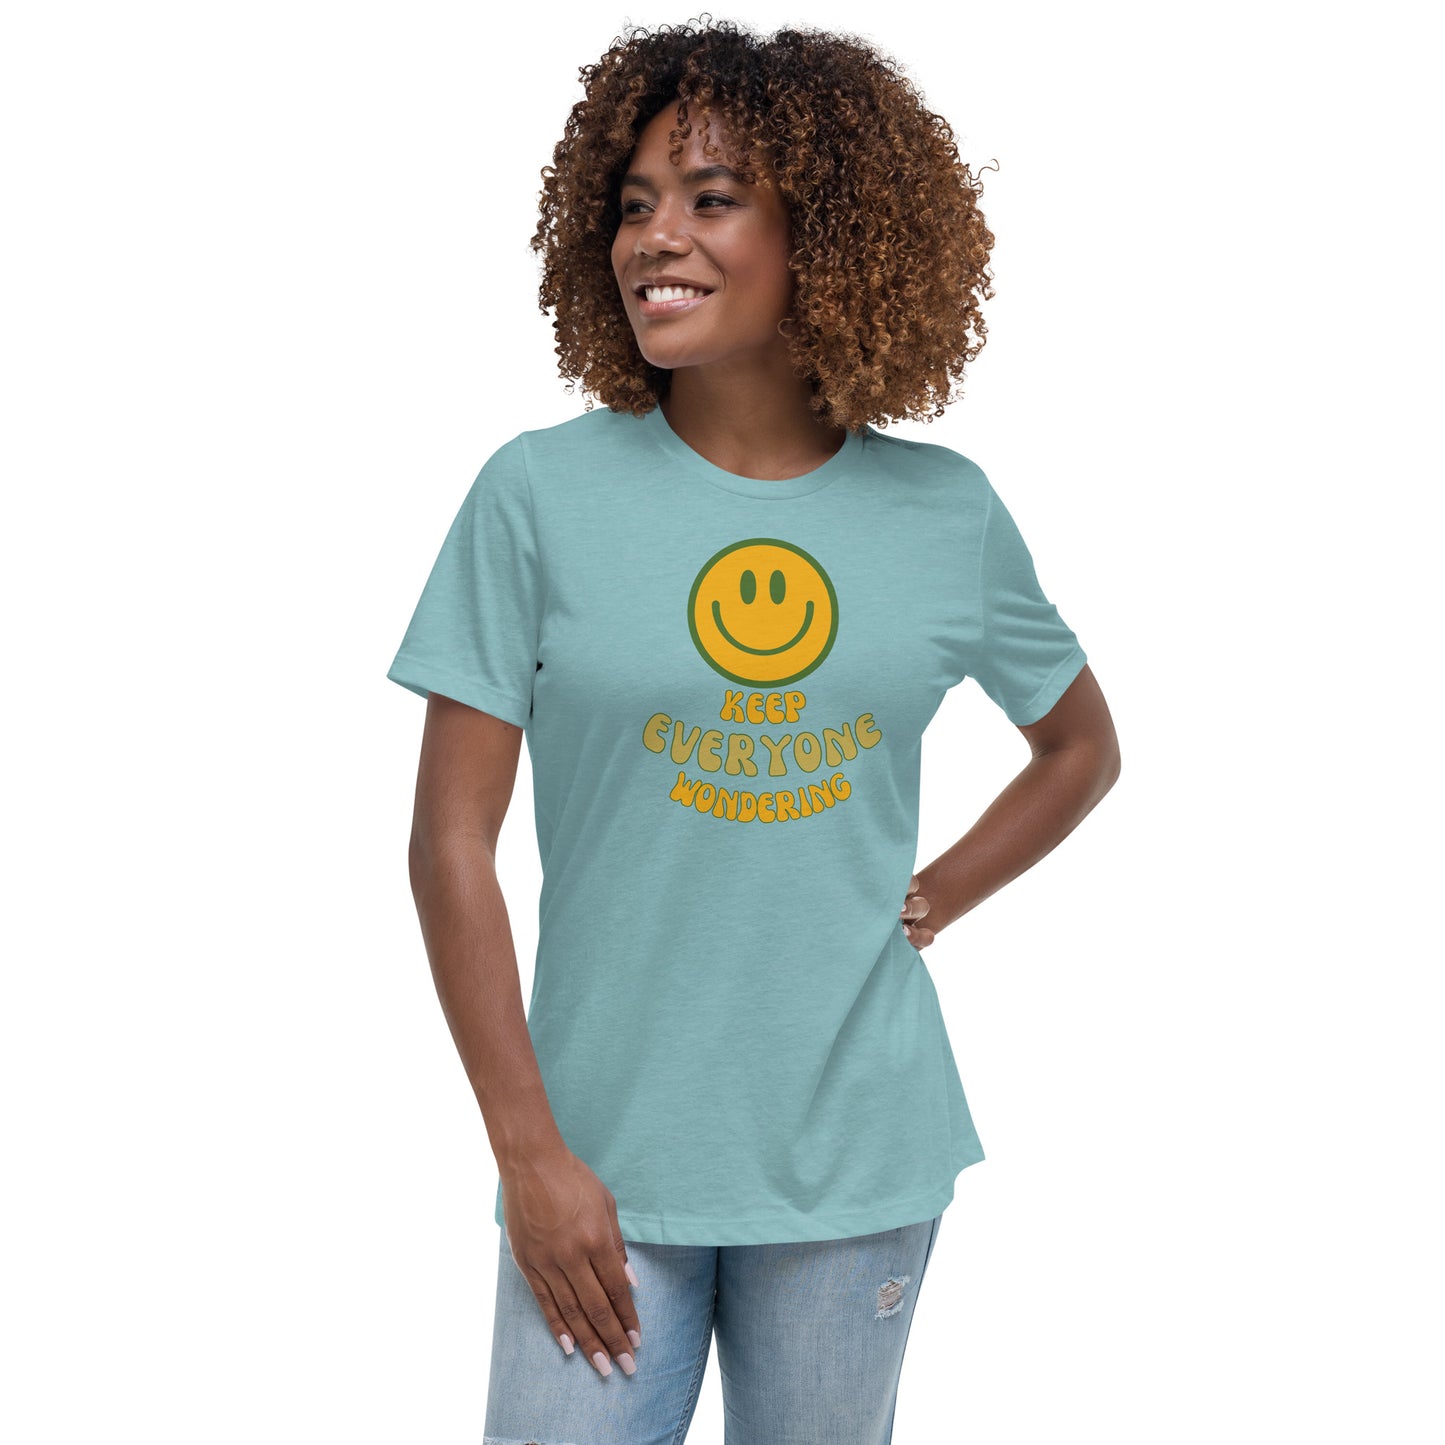 (SMILE) Keep Everyone Wondering Women's Relaxed T-Shirt